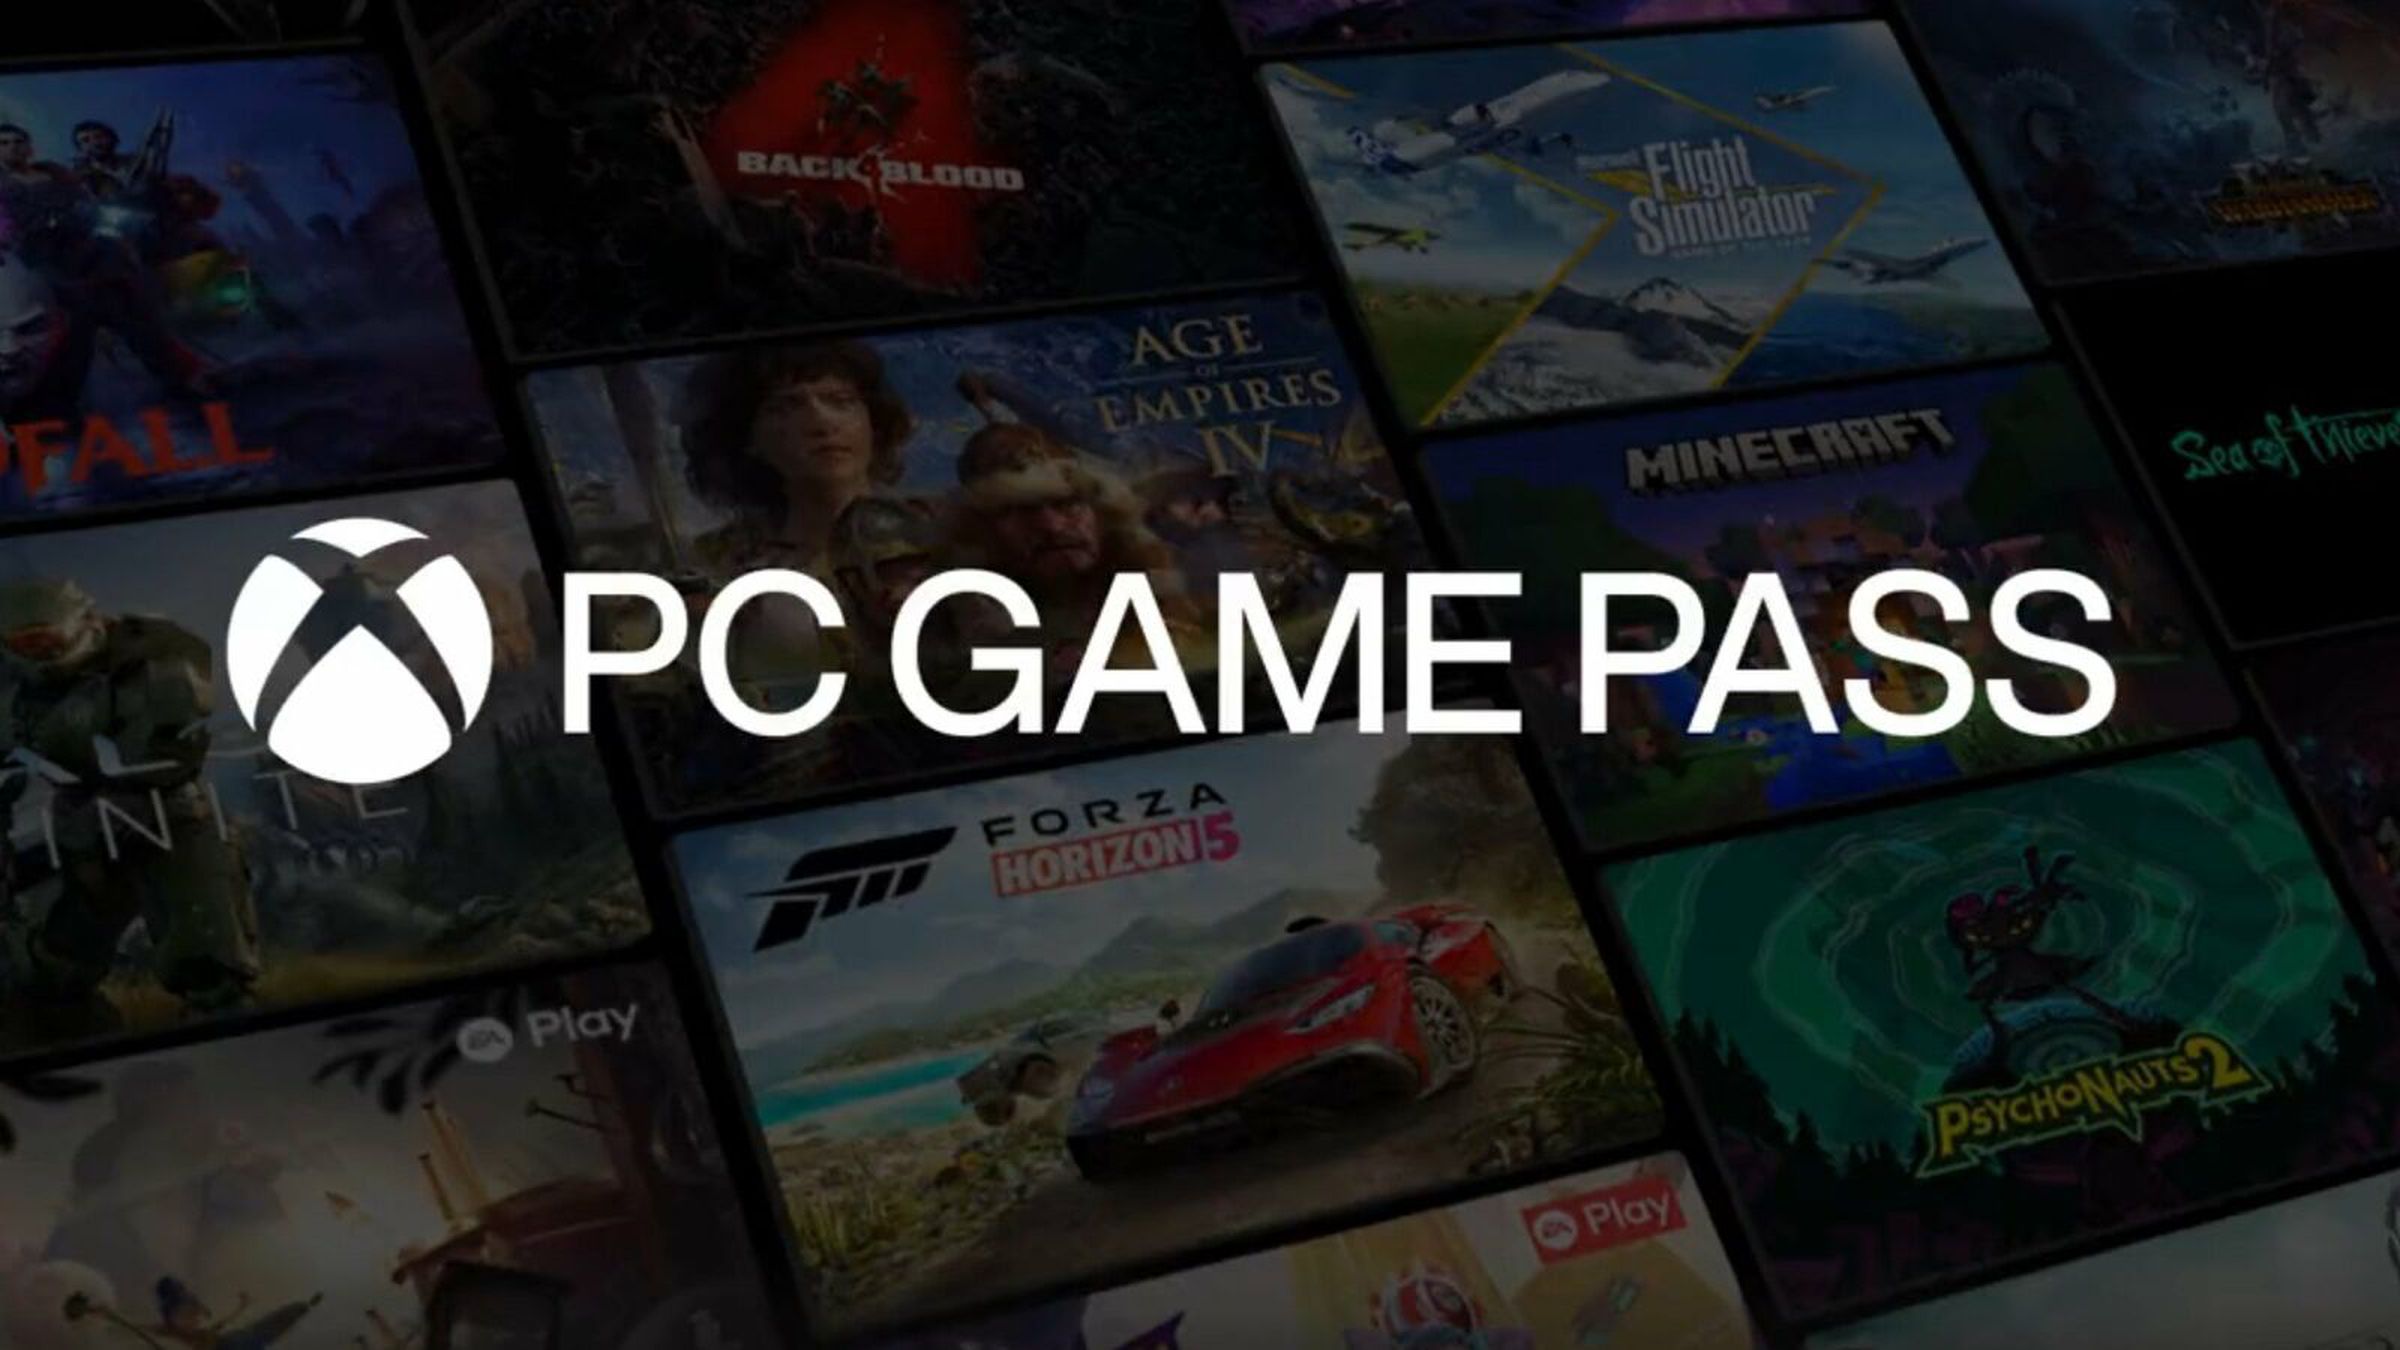 PC Game Pass is growing a lot.